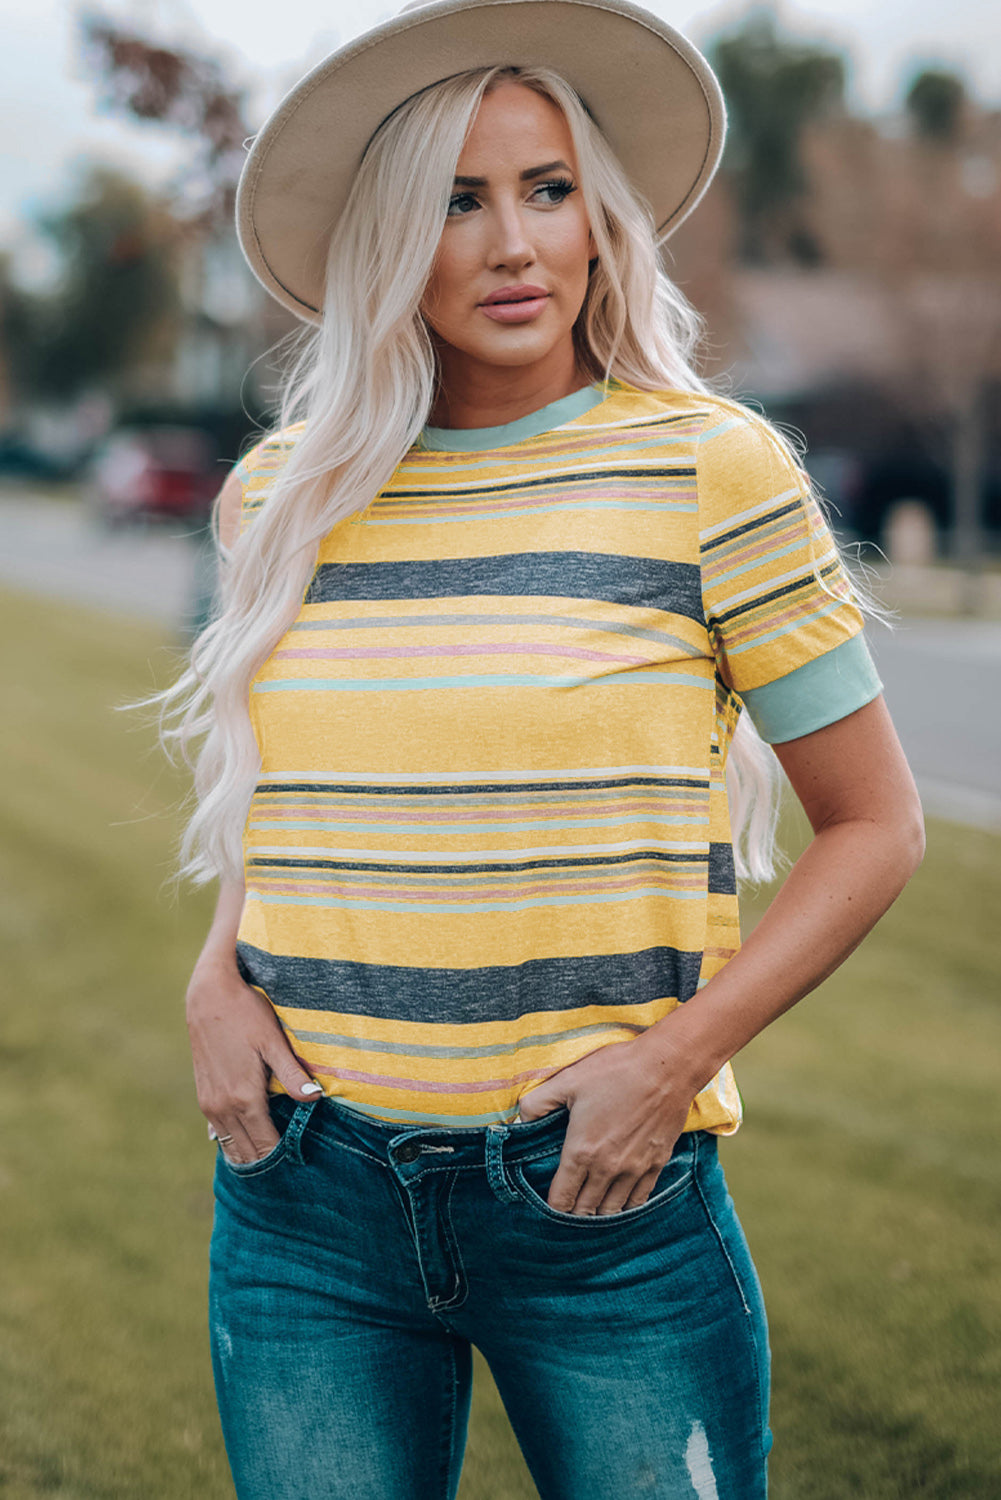 Women's Full Size Multicolored Striped Round Neck Tee Shirt